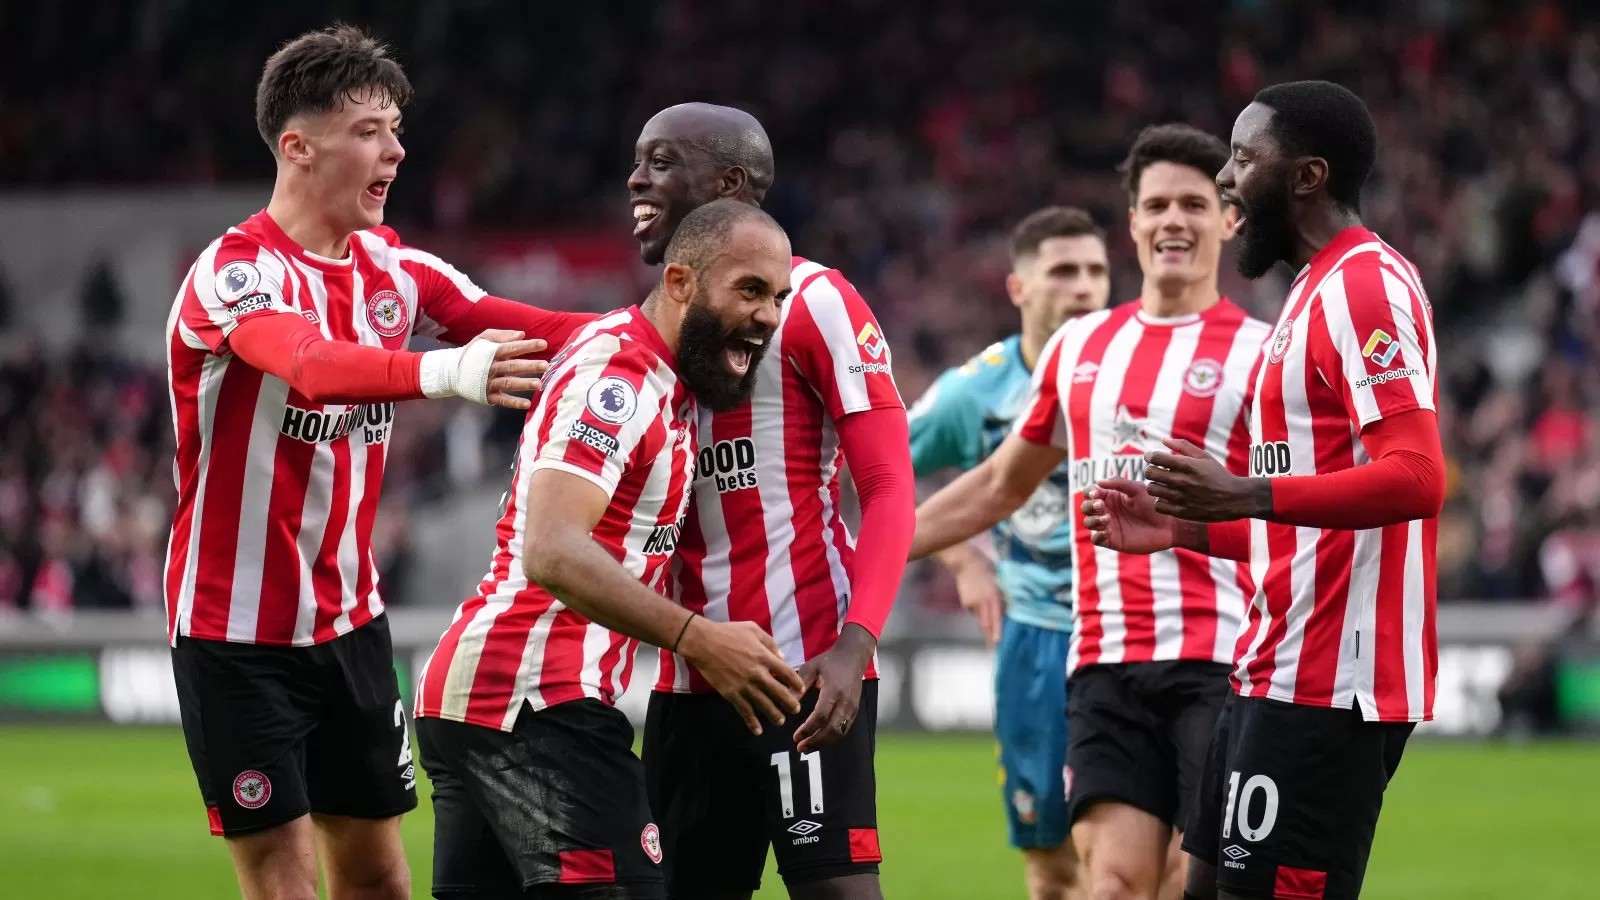 Brentford 3-0 Southampton: Saints fans turn on Jones as defeat to Bees leaves them rock bottom